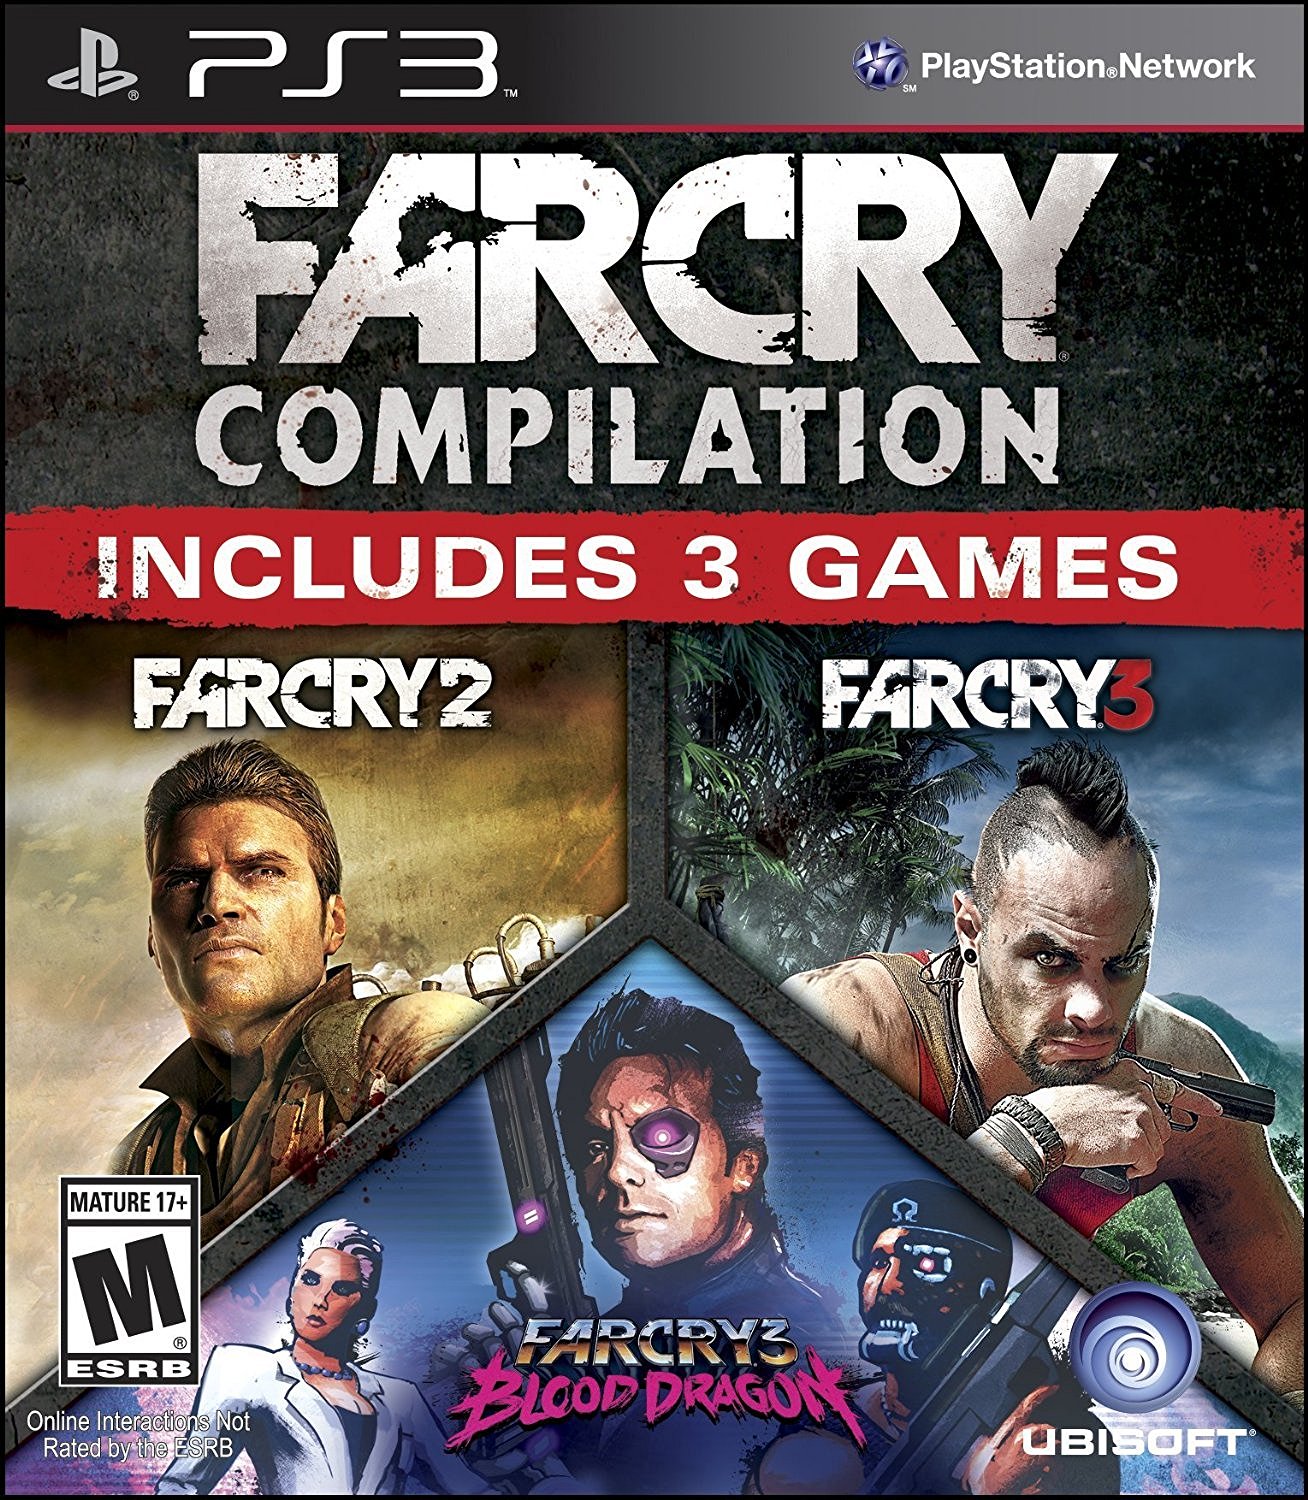 Far Cry Compilation Includes 3 game: Farcry 2 Farcry 3 Farcry 3 blood dragon